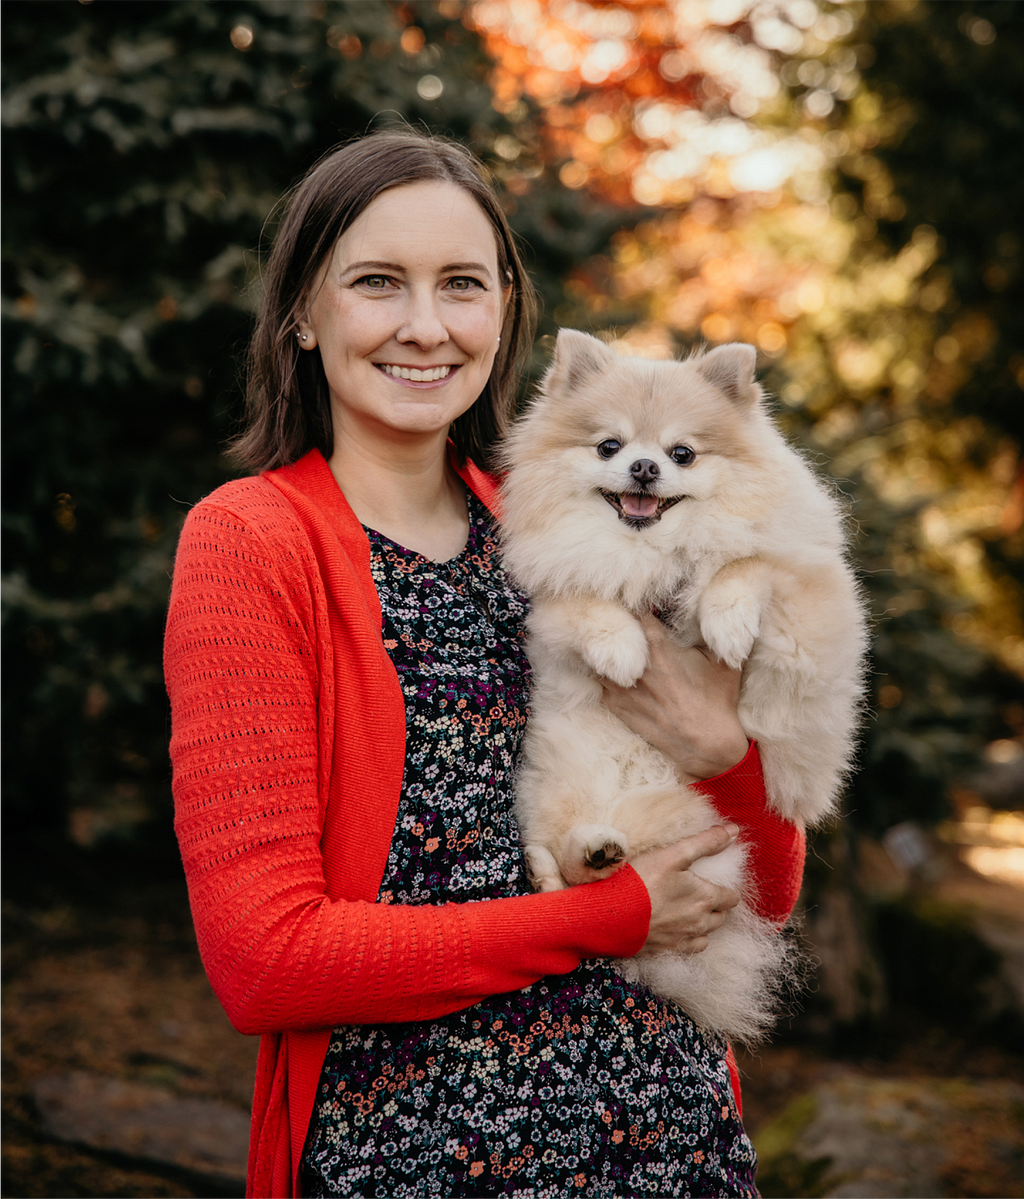 A smiling Kelly in a bright red sweater holds her grinning dog. Both stare into the camera, posing for the picture.